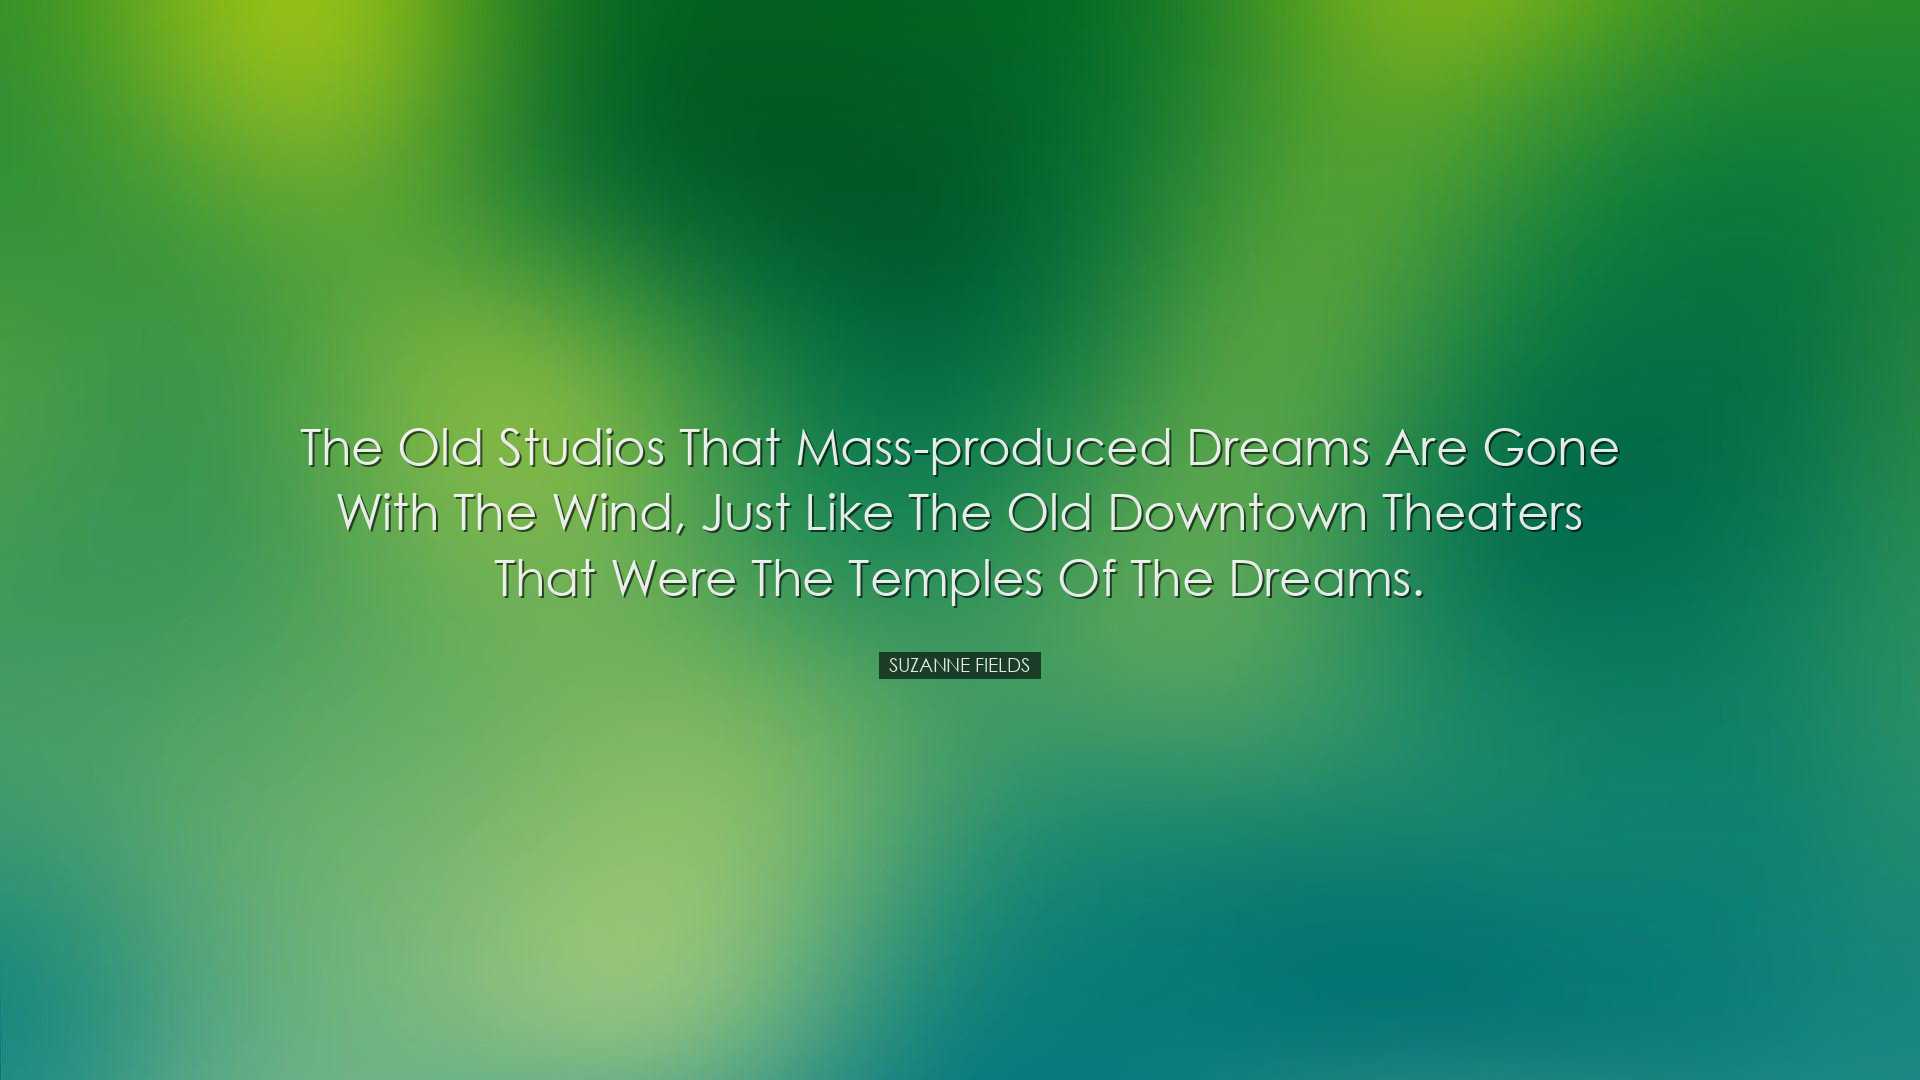 The old studios that mass-produced dreams are gone with the wind,